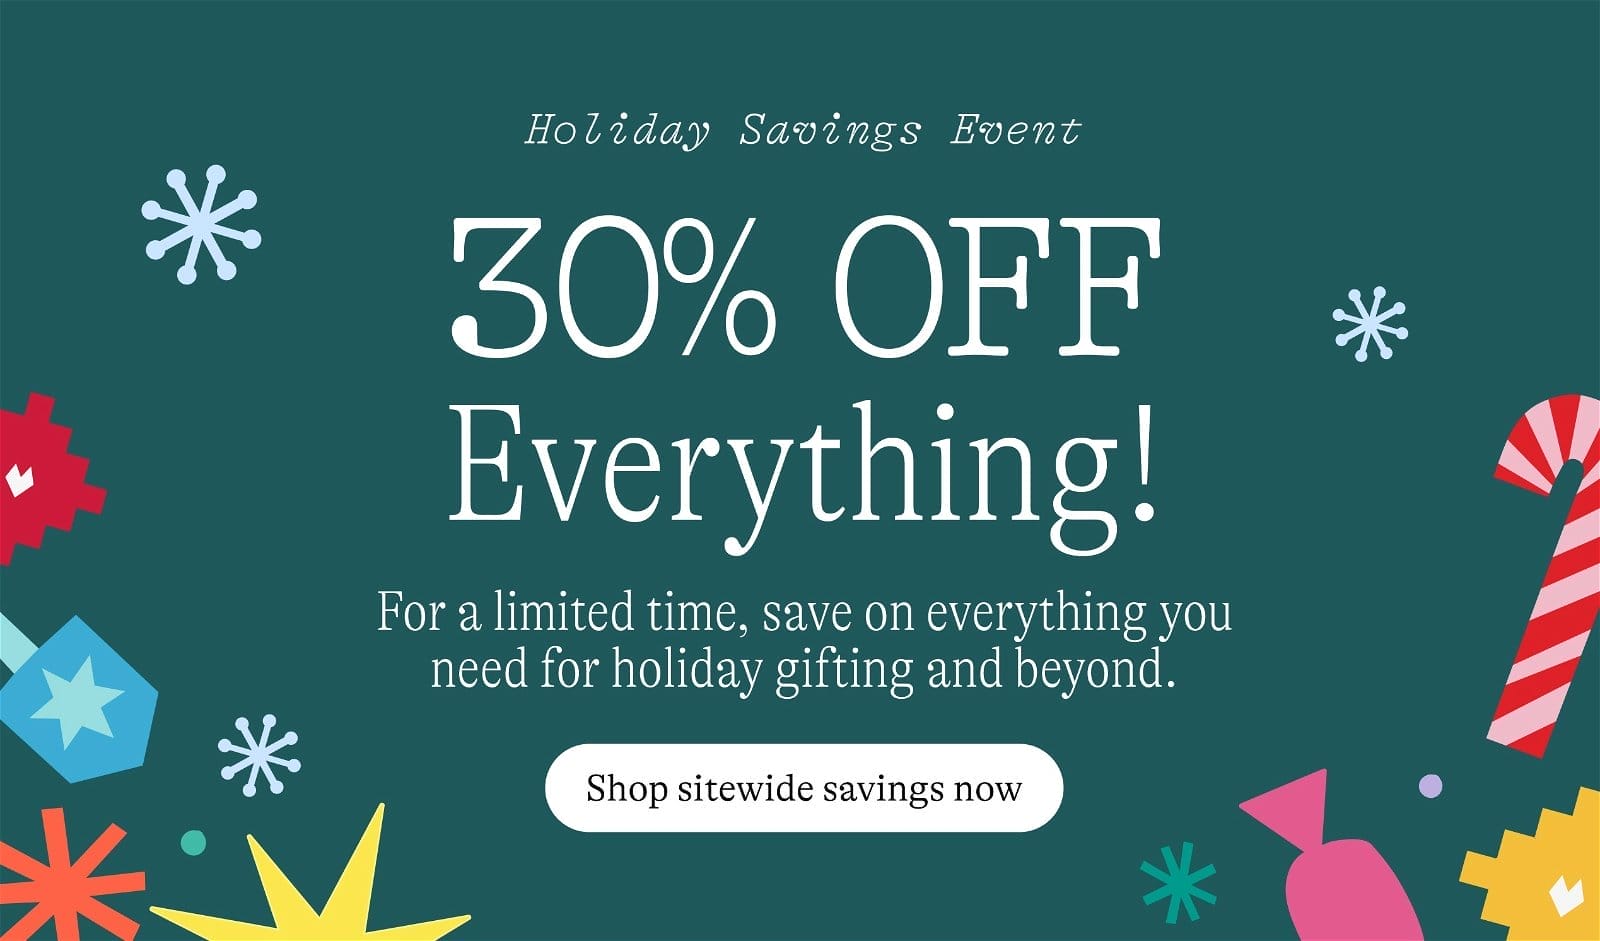 Holiday Savings Event: 30% OFF Everything. For a limited time, save on everything you need for holiday gifting and beyond. Shop sitewide savings now